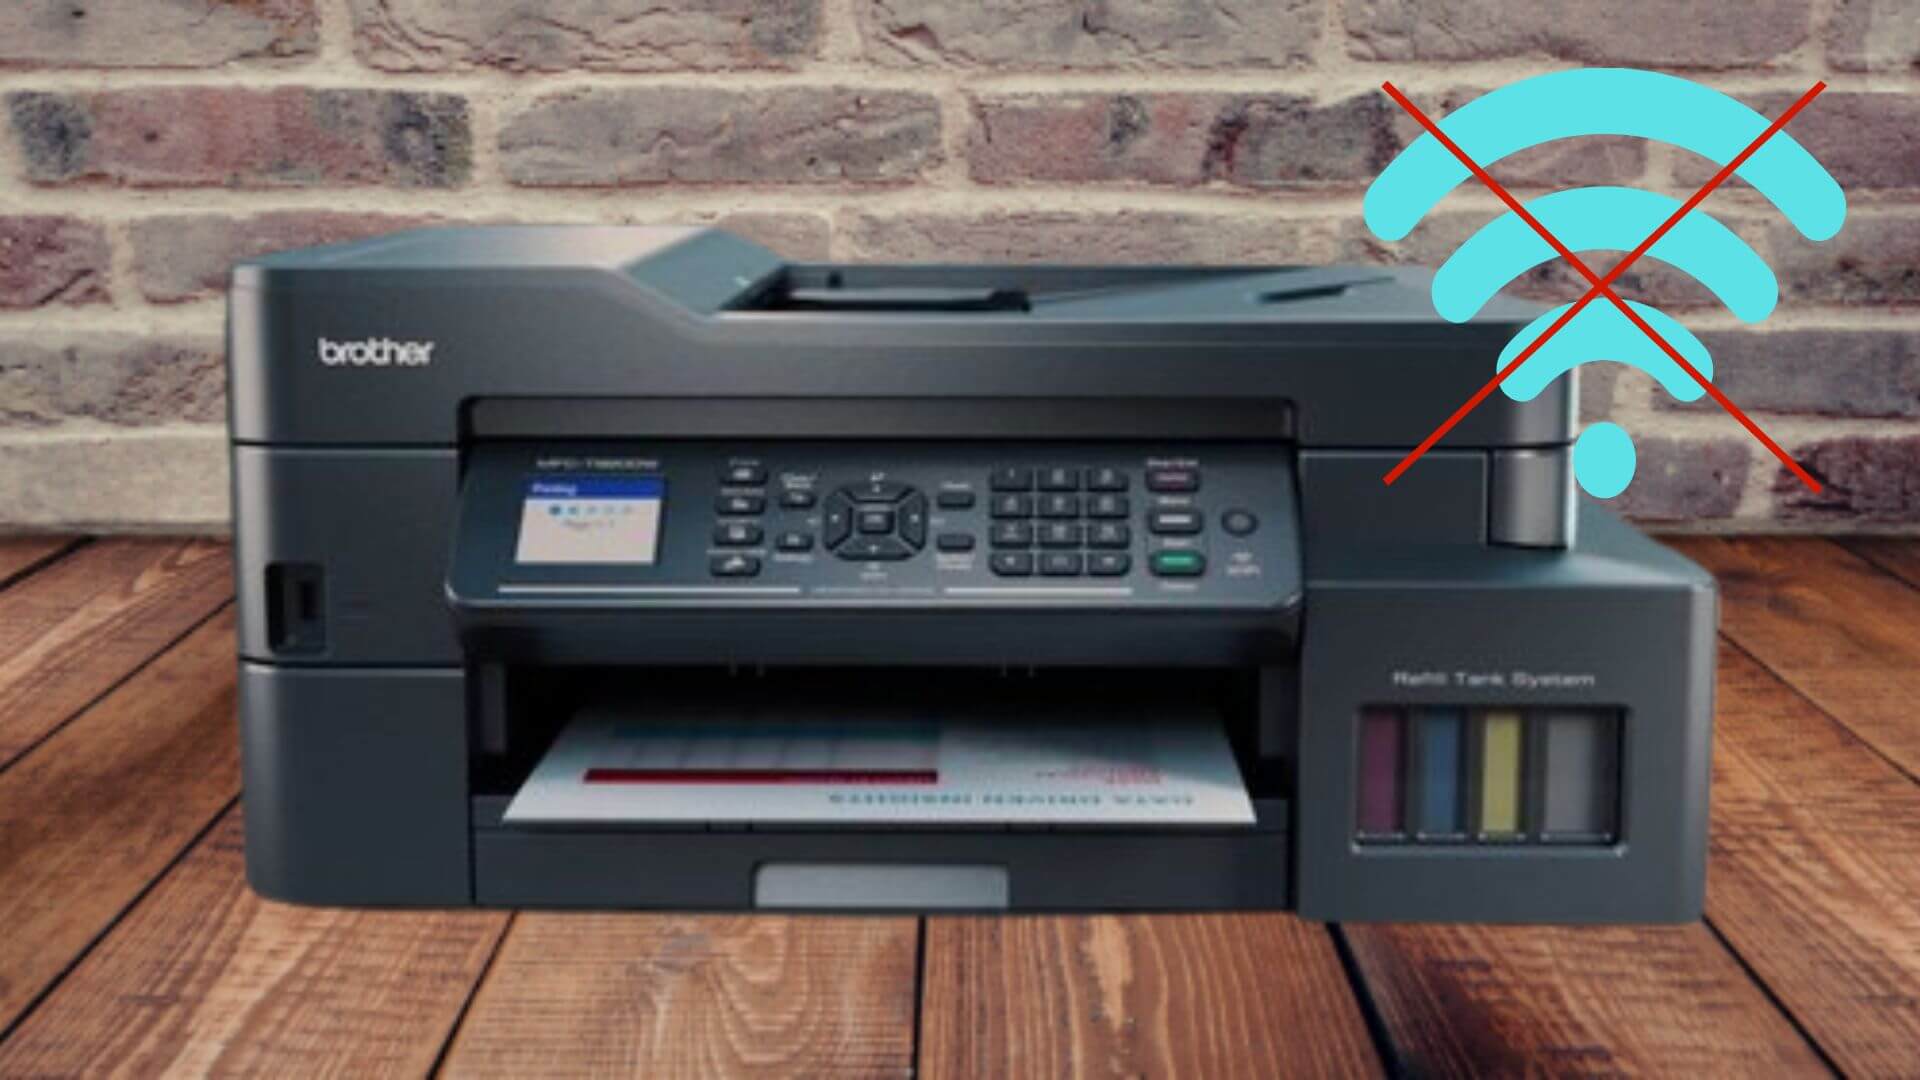 Brother Printer not Connecting To Wi-Fi